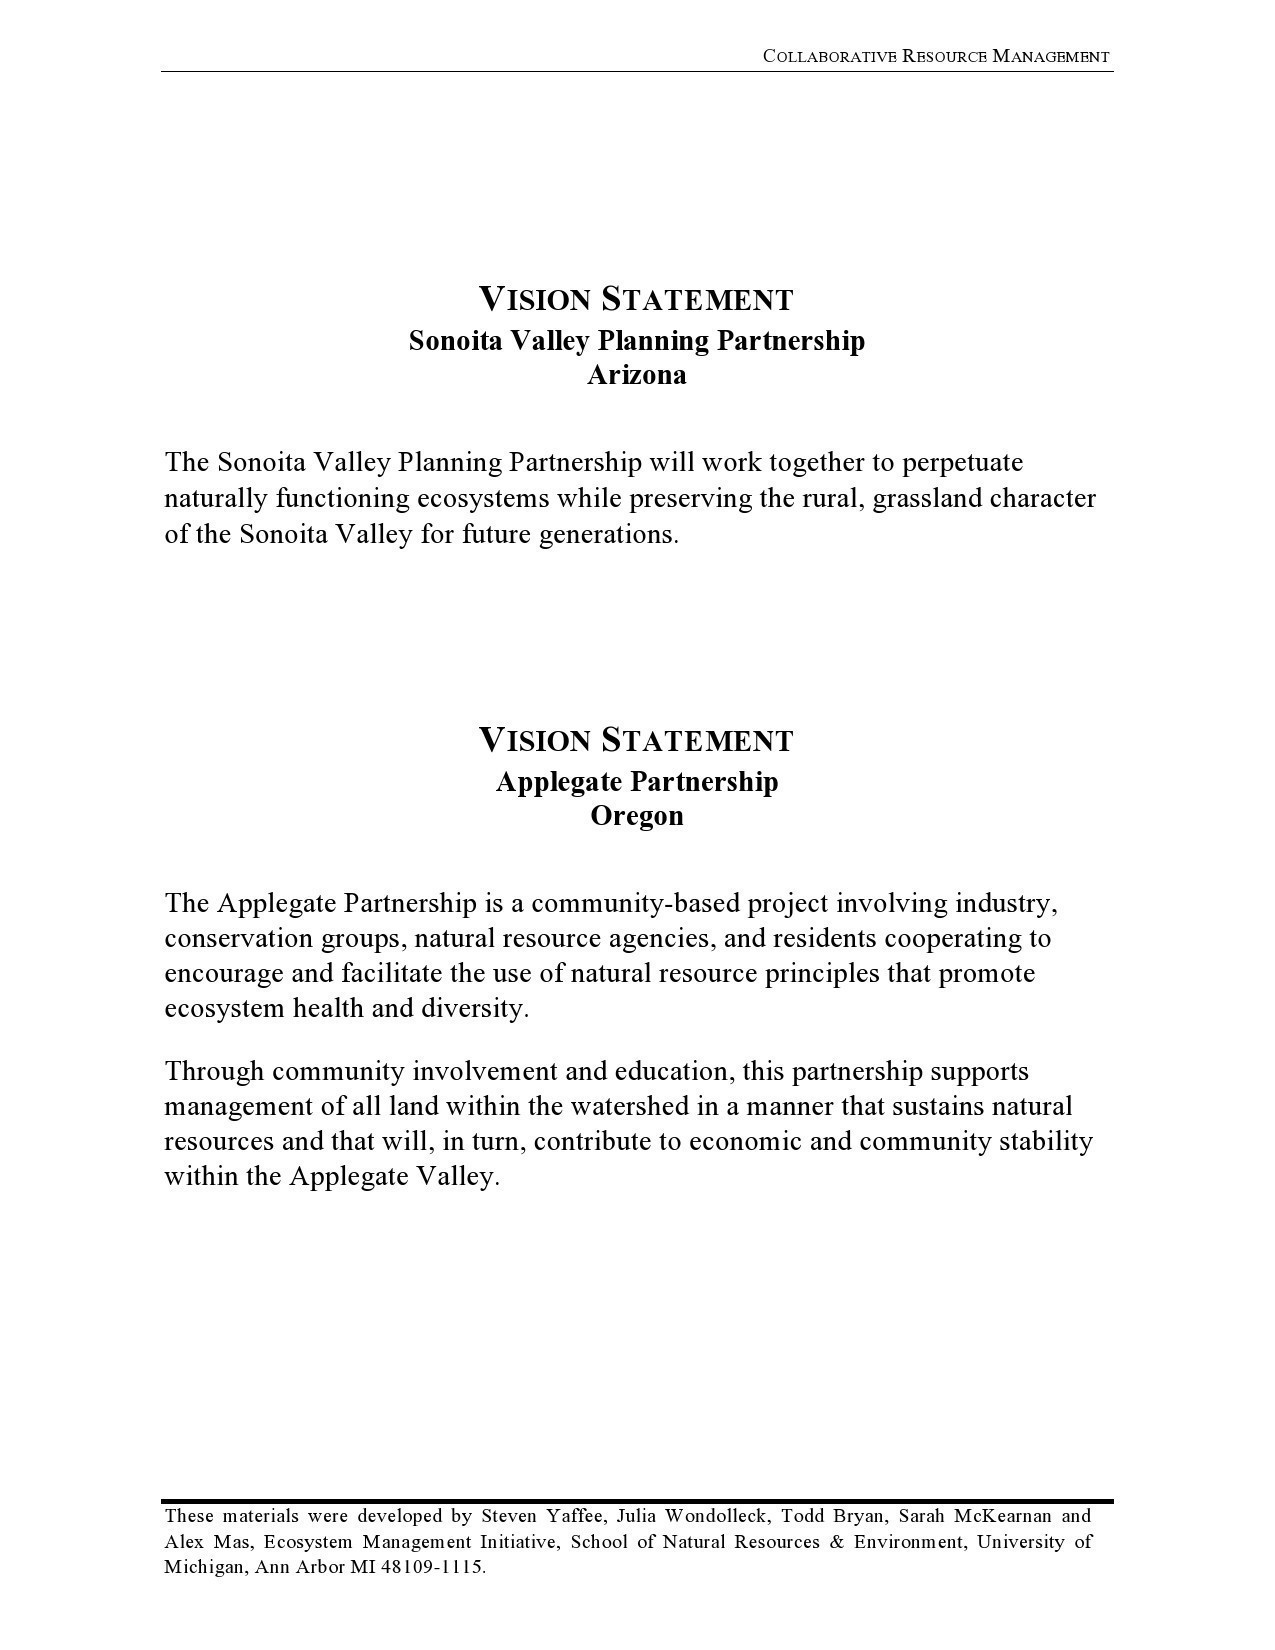 Free vision statement template 10